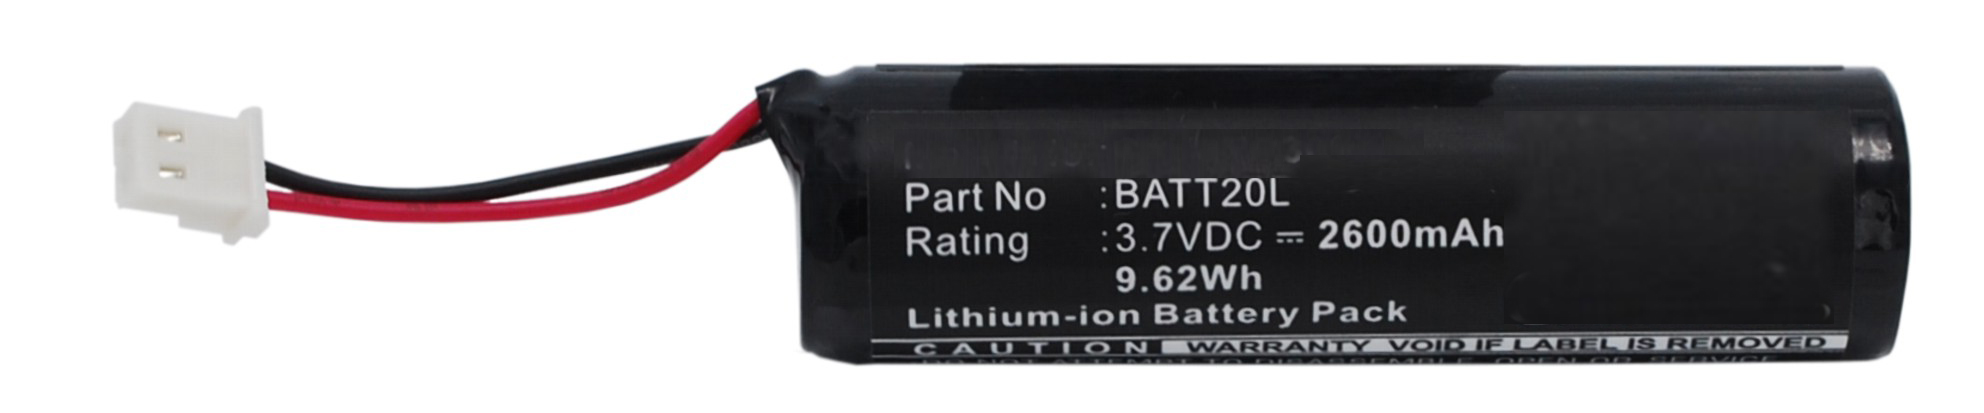 Synergy Digital Battery Compatible With MIDLAND BATT20L Replacement Battery - (Li-Ion, 3.7V, 2600 mAh)